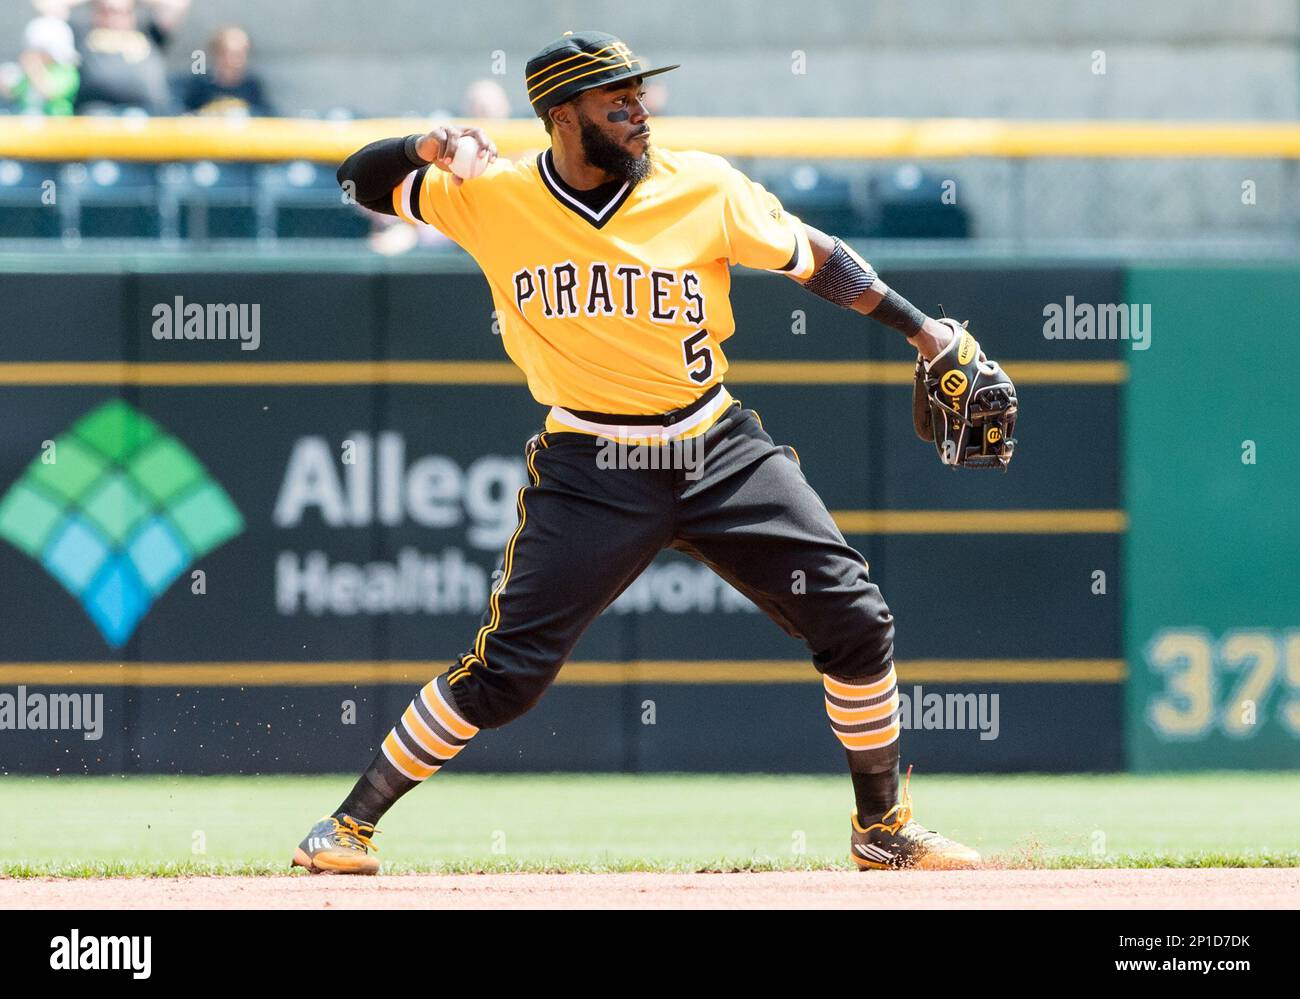 May 1 2016: Pittsburgh Pirates second baseman Josh Harrison (5) in action  during the game between the Cincinnati Reds and the Pittsburgh Pirates at  PNC Park in Pittsburgh, Pennsylvania (Photo by Justin